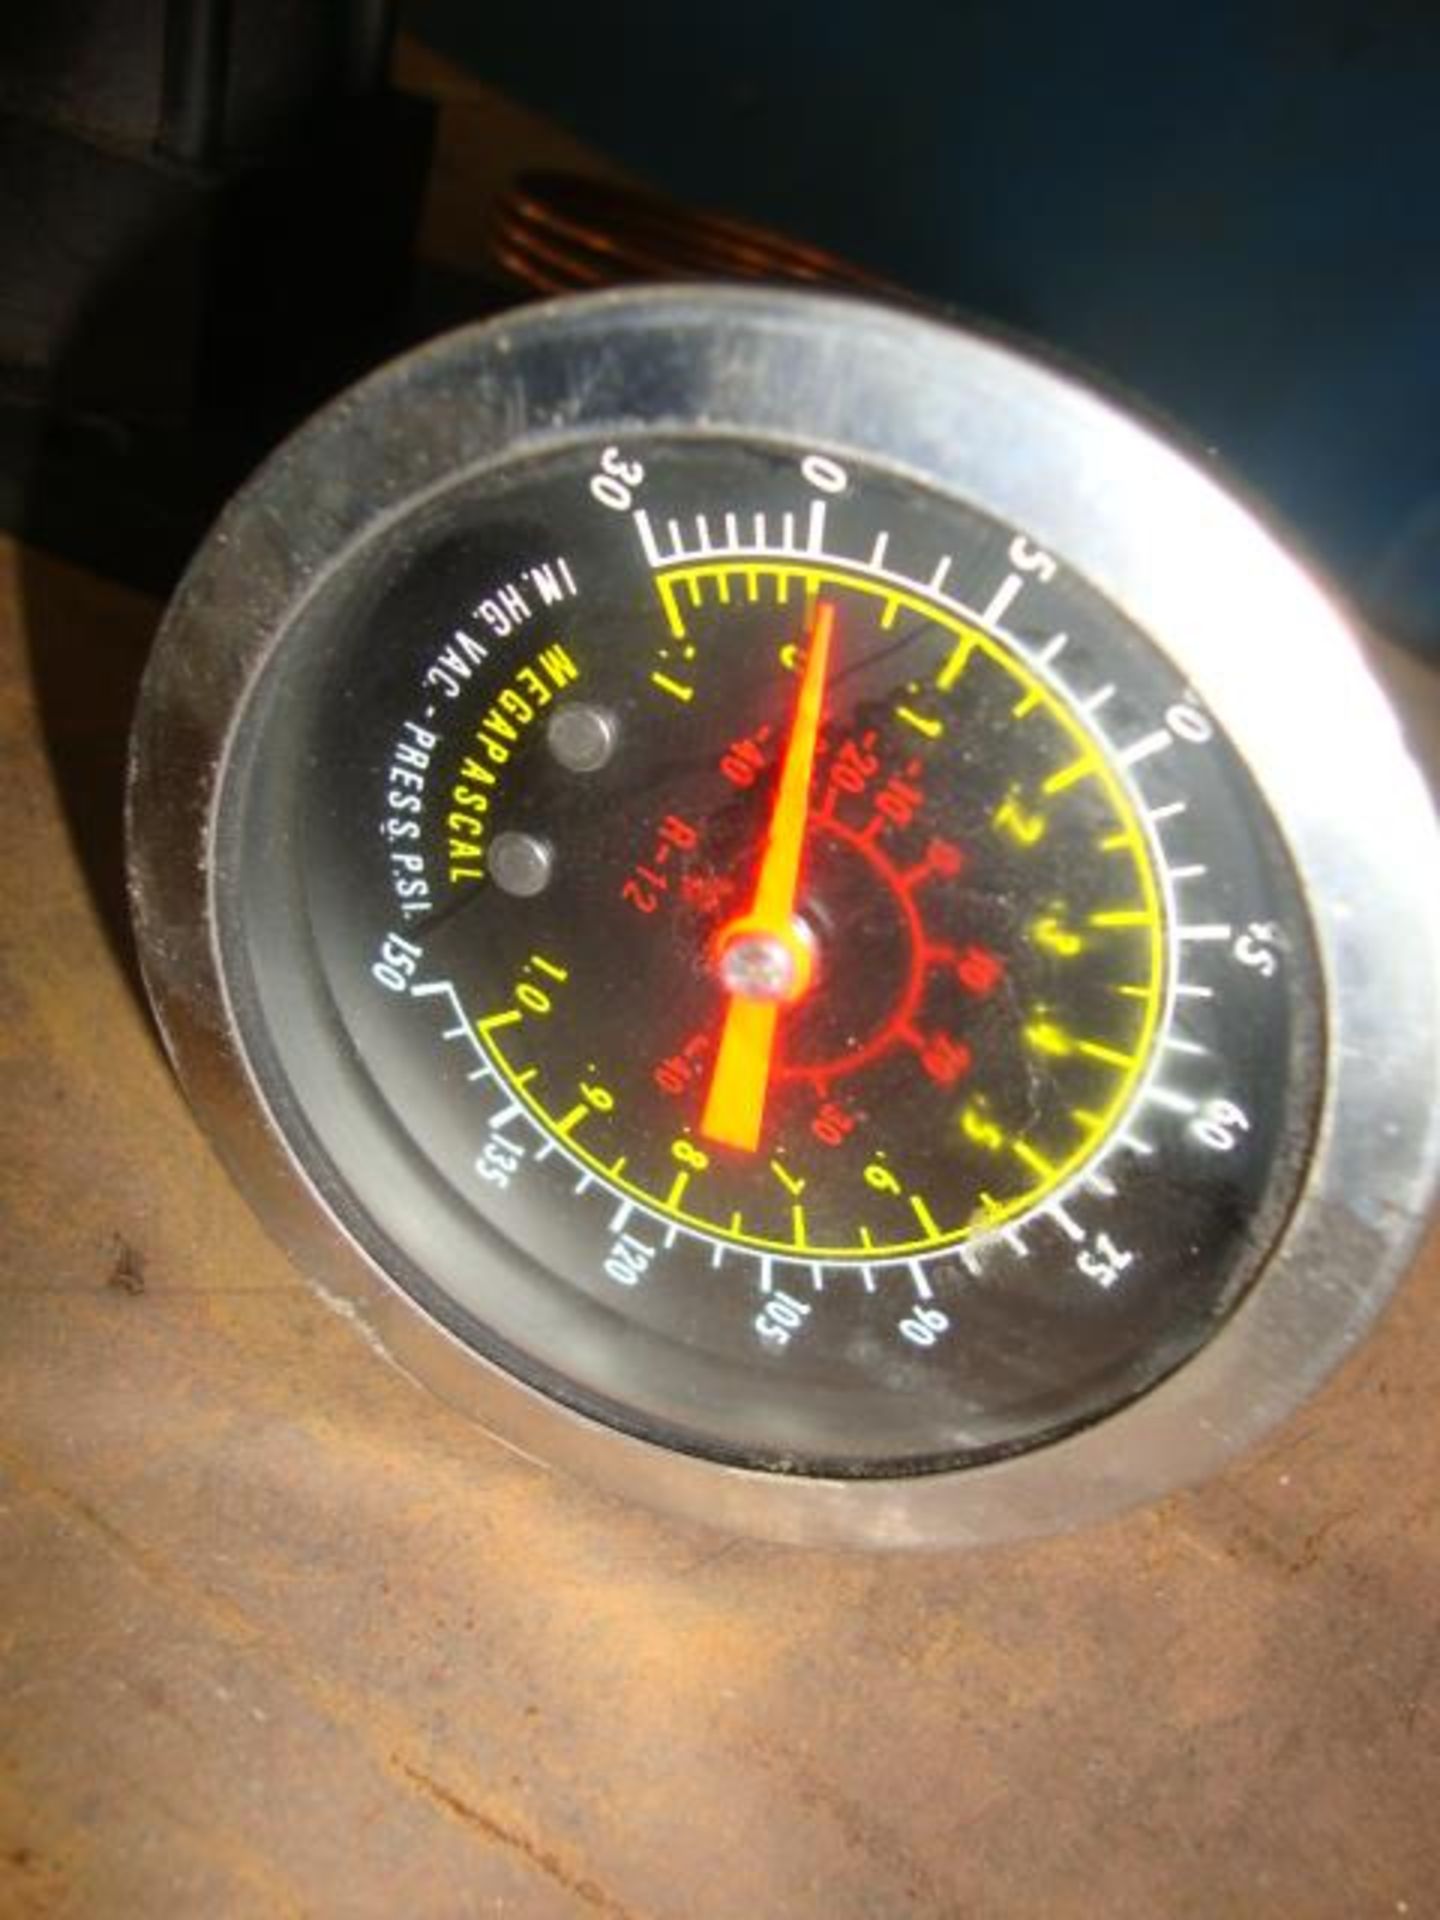 Pr of Megapascal Gauges and Lehigh JHD15 Cylinder, all appear new - Image 3 of 3